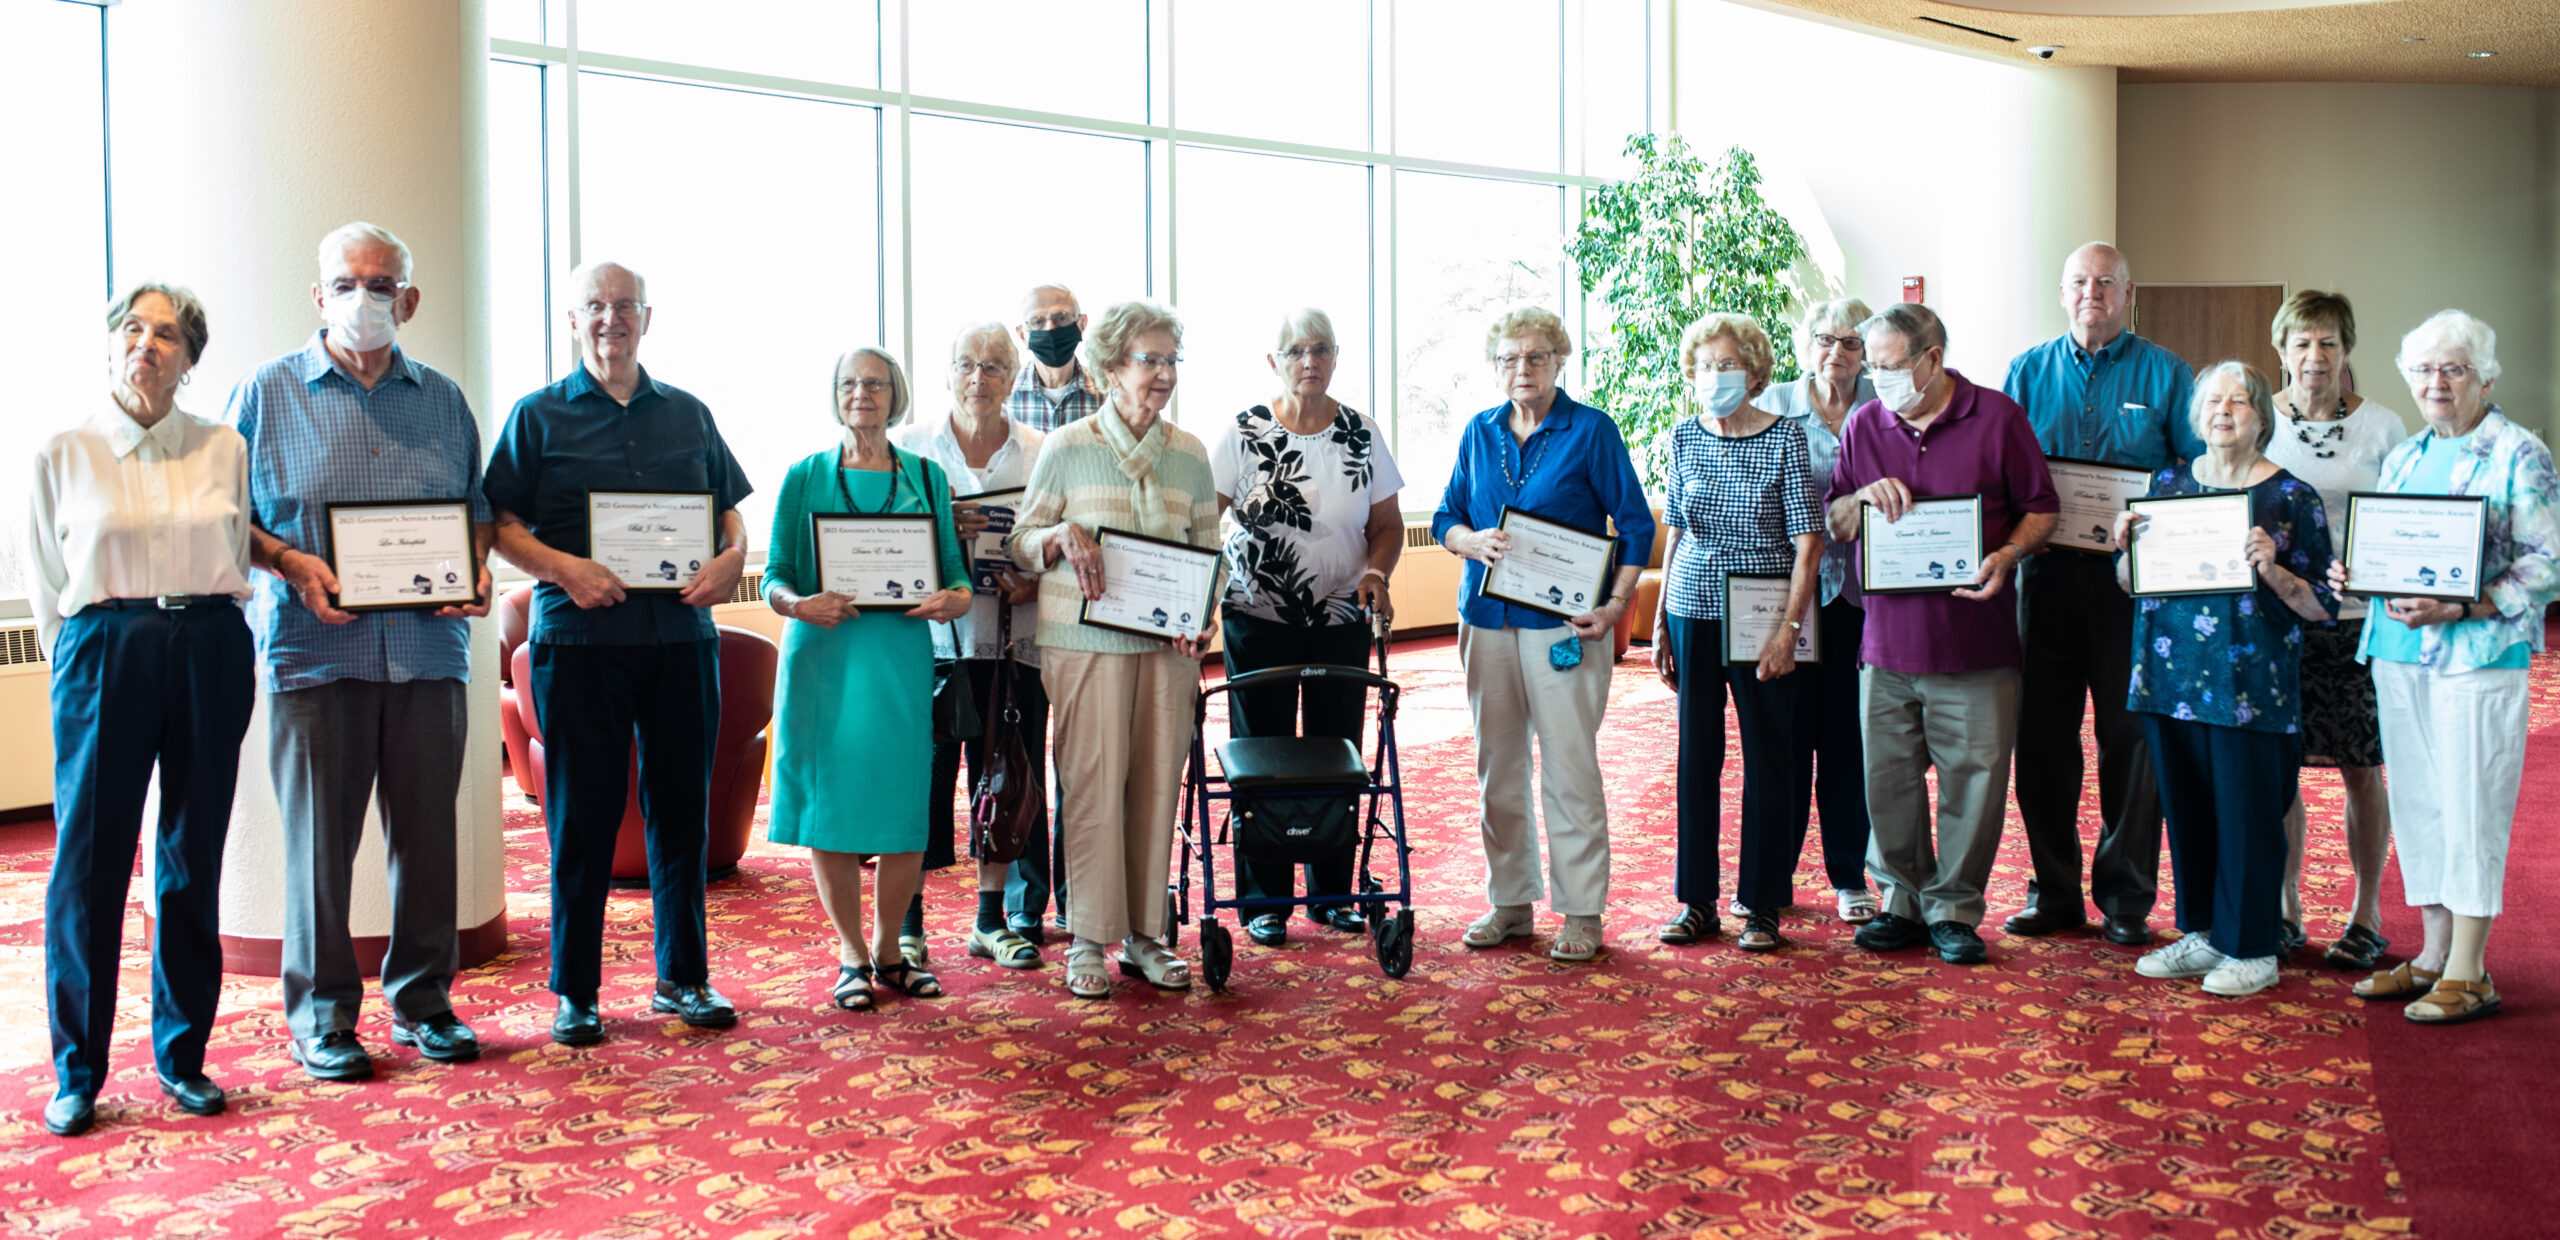 A group of elderly people standing in a row holding 8x10 framed awards they received 